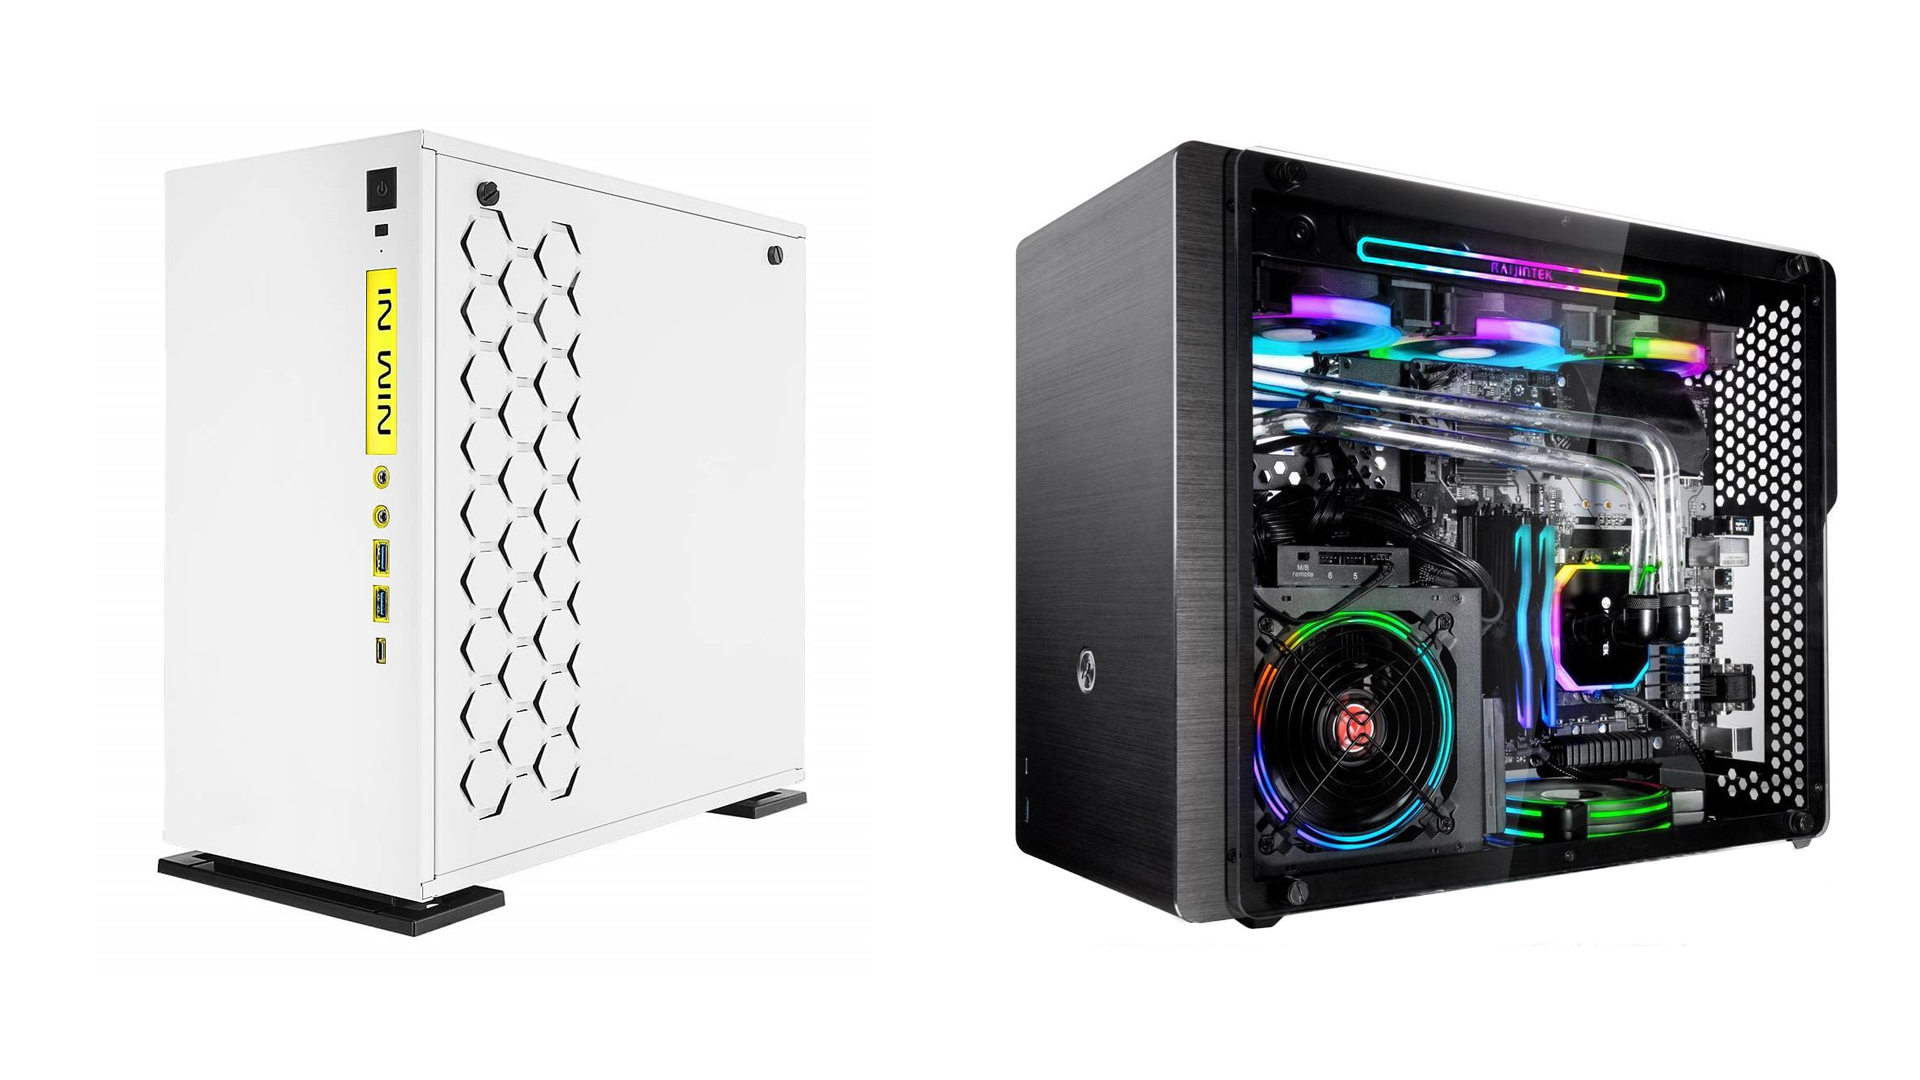 The InWin 301C and the OPHION M EVO ALS